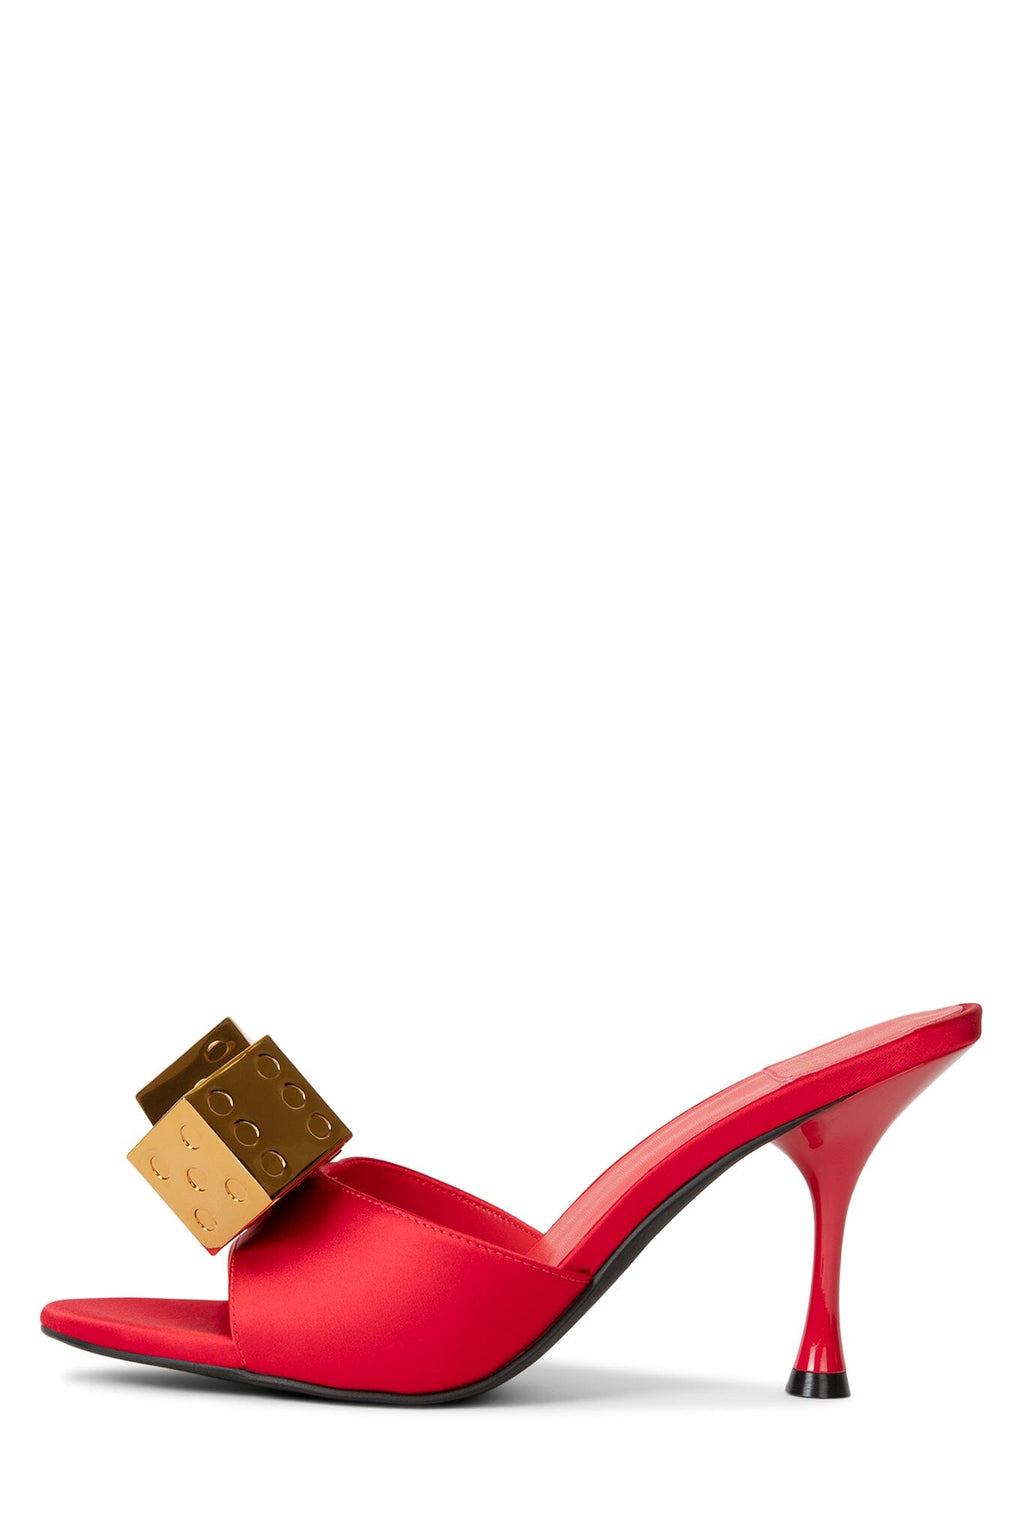 DICE Jeffrey Campbell Red Satin Gold 6 